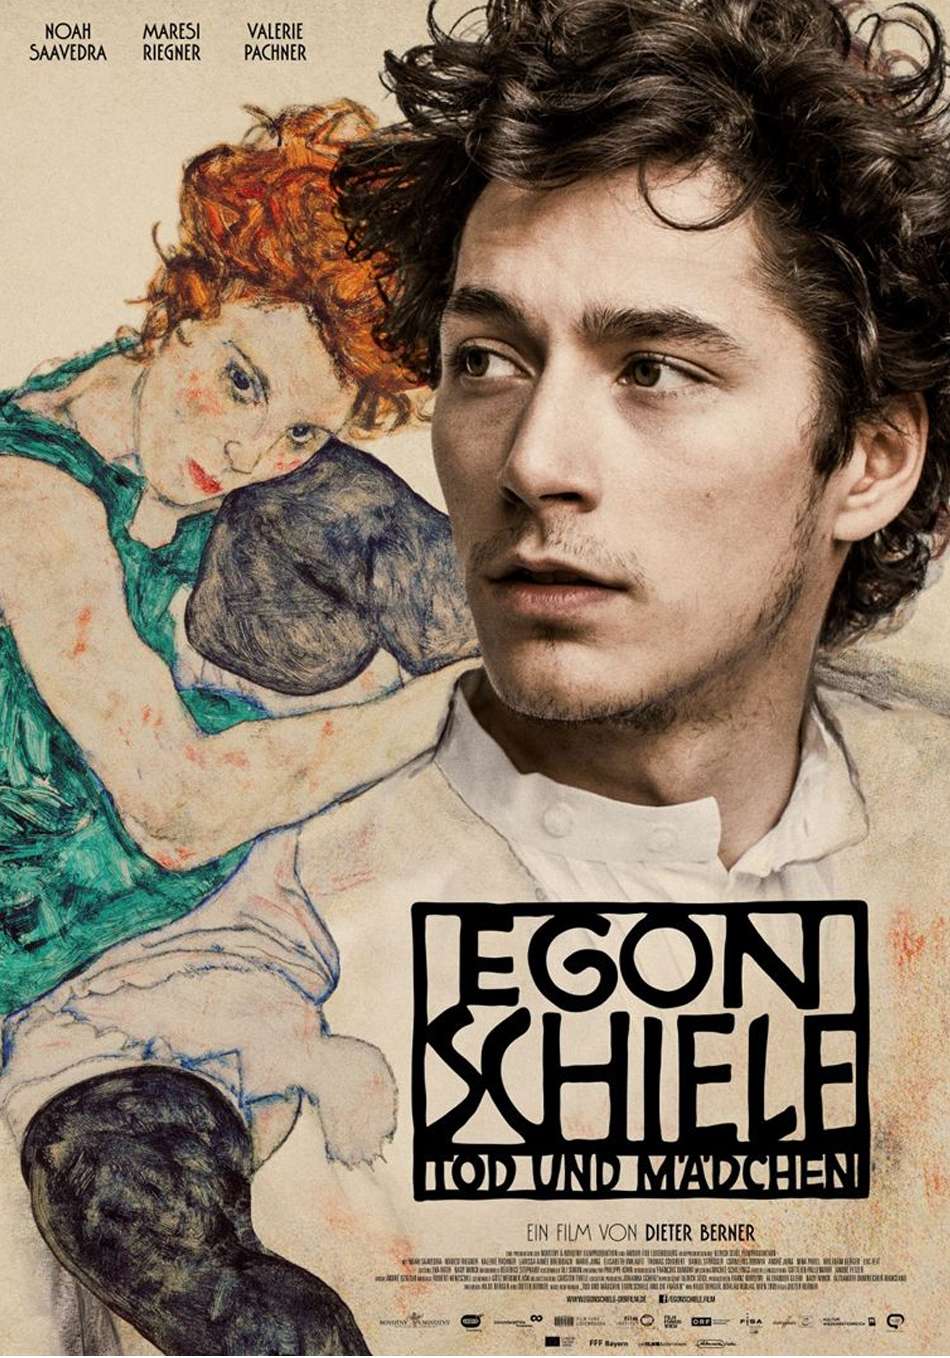 Egon Schiele: Death and the Maiden EGON SCHIELE, O ΘAΝΑΤΟΣ ΚΑΙ Η ΚΟΠEΛΑ Poster